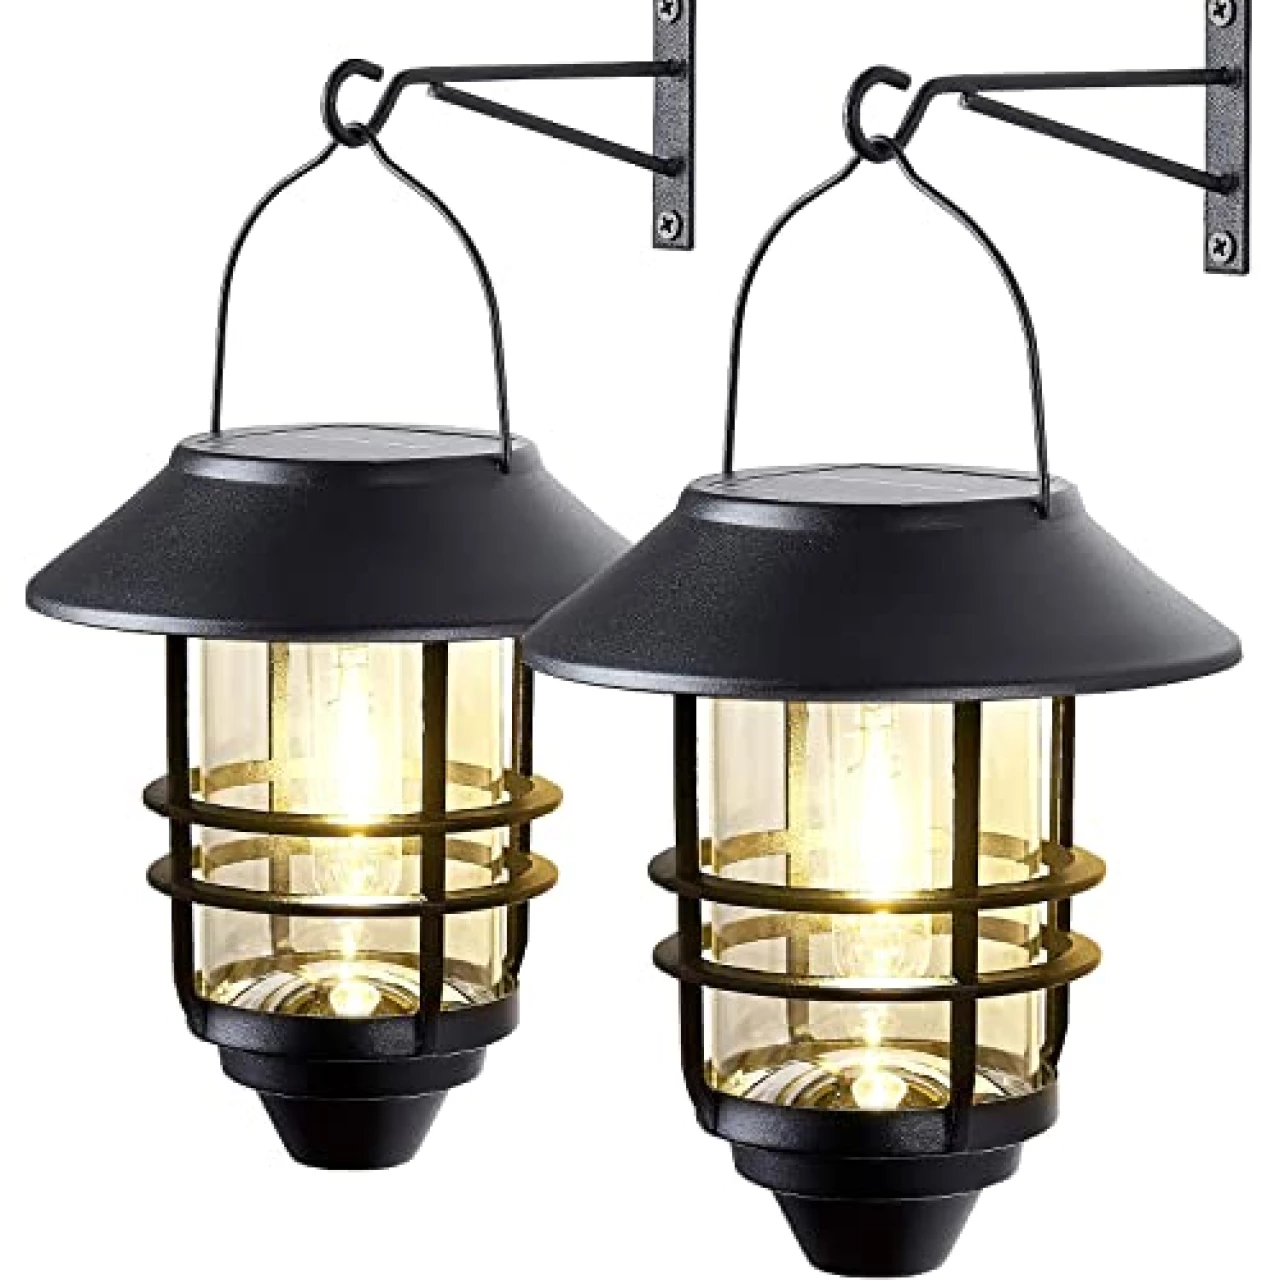 2 Pack Solar Lantern Wall Lights Fixtures, Solar Powered Porch Light, Heavy Glass &amp; Stainless Hanging Solar Wall Sconce Outdoor